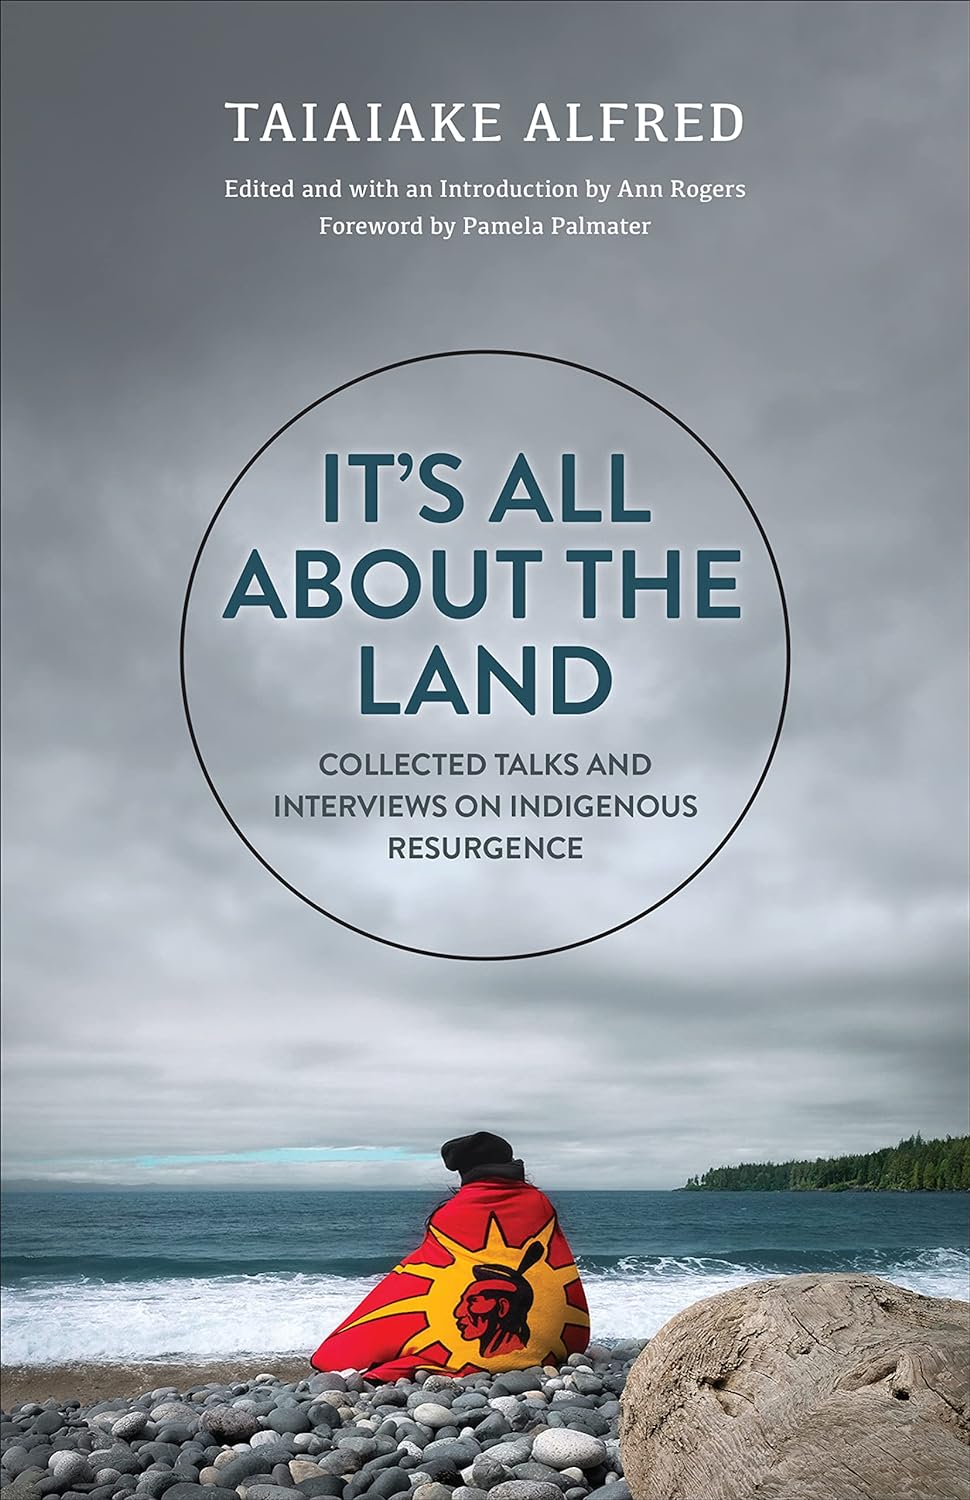 It's All About The Land: Collected Talks And Interviews On Indigenous Resurgence [Taiaiake Alfred, Pamela Palmater, et al.]